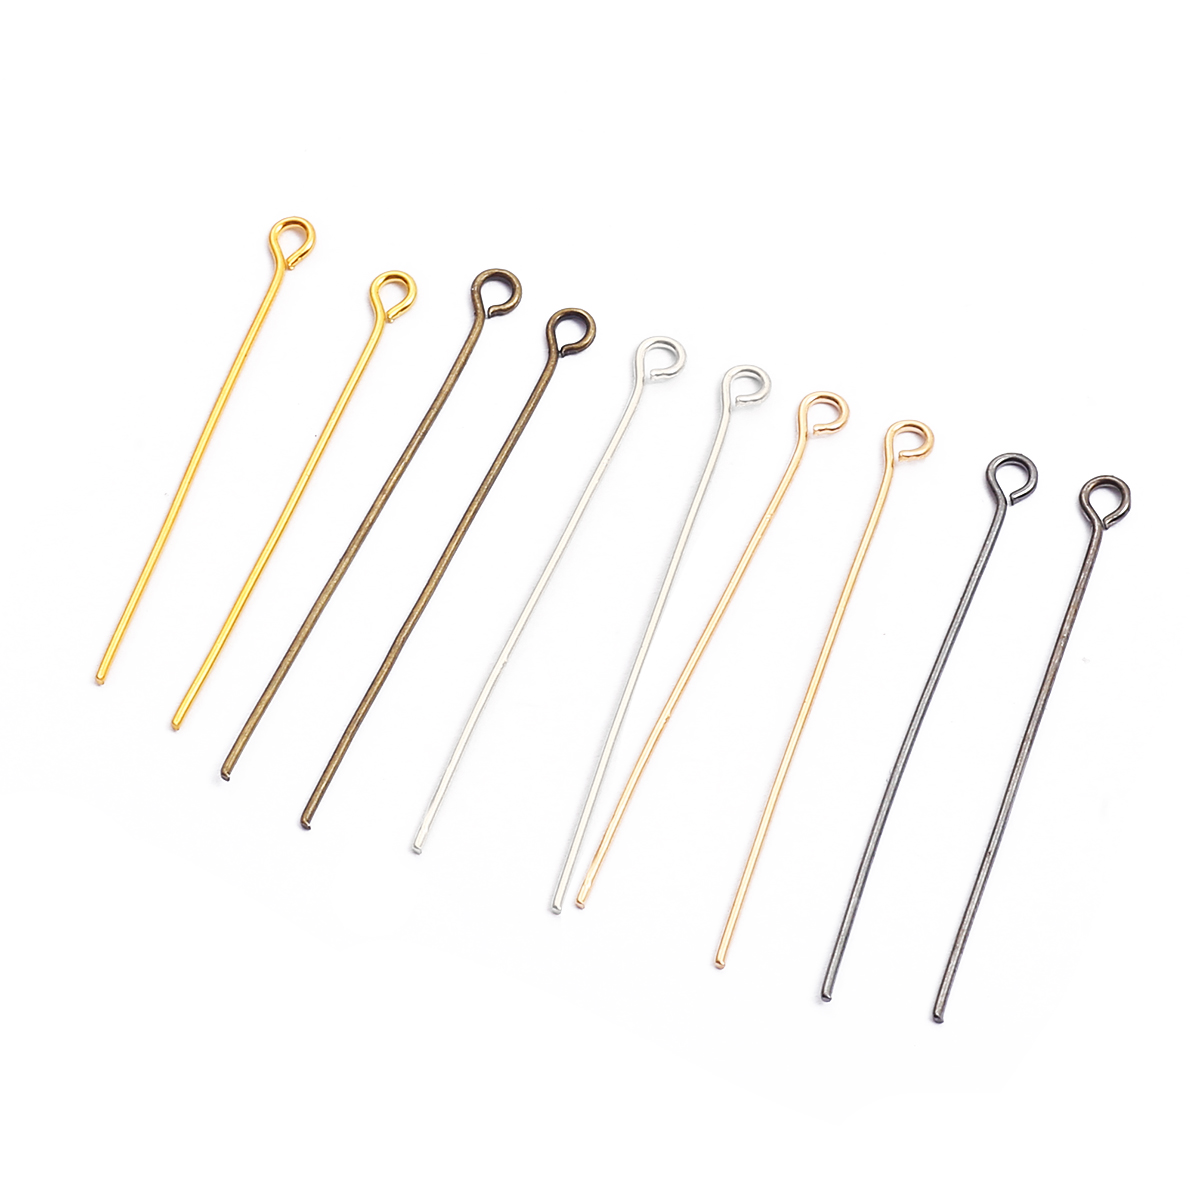 100PCS Silver Gold Plated Ball Head Pins Jewelry 16/20/30/40/50mm Finding 